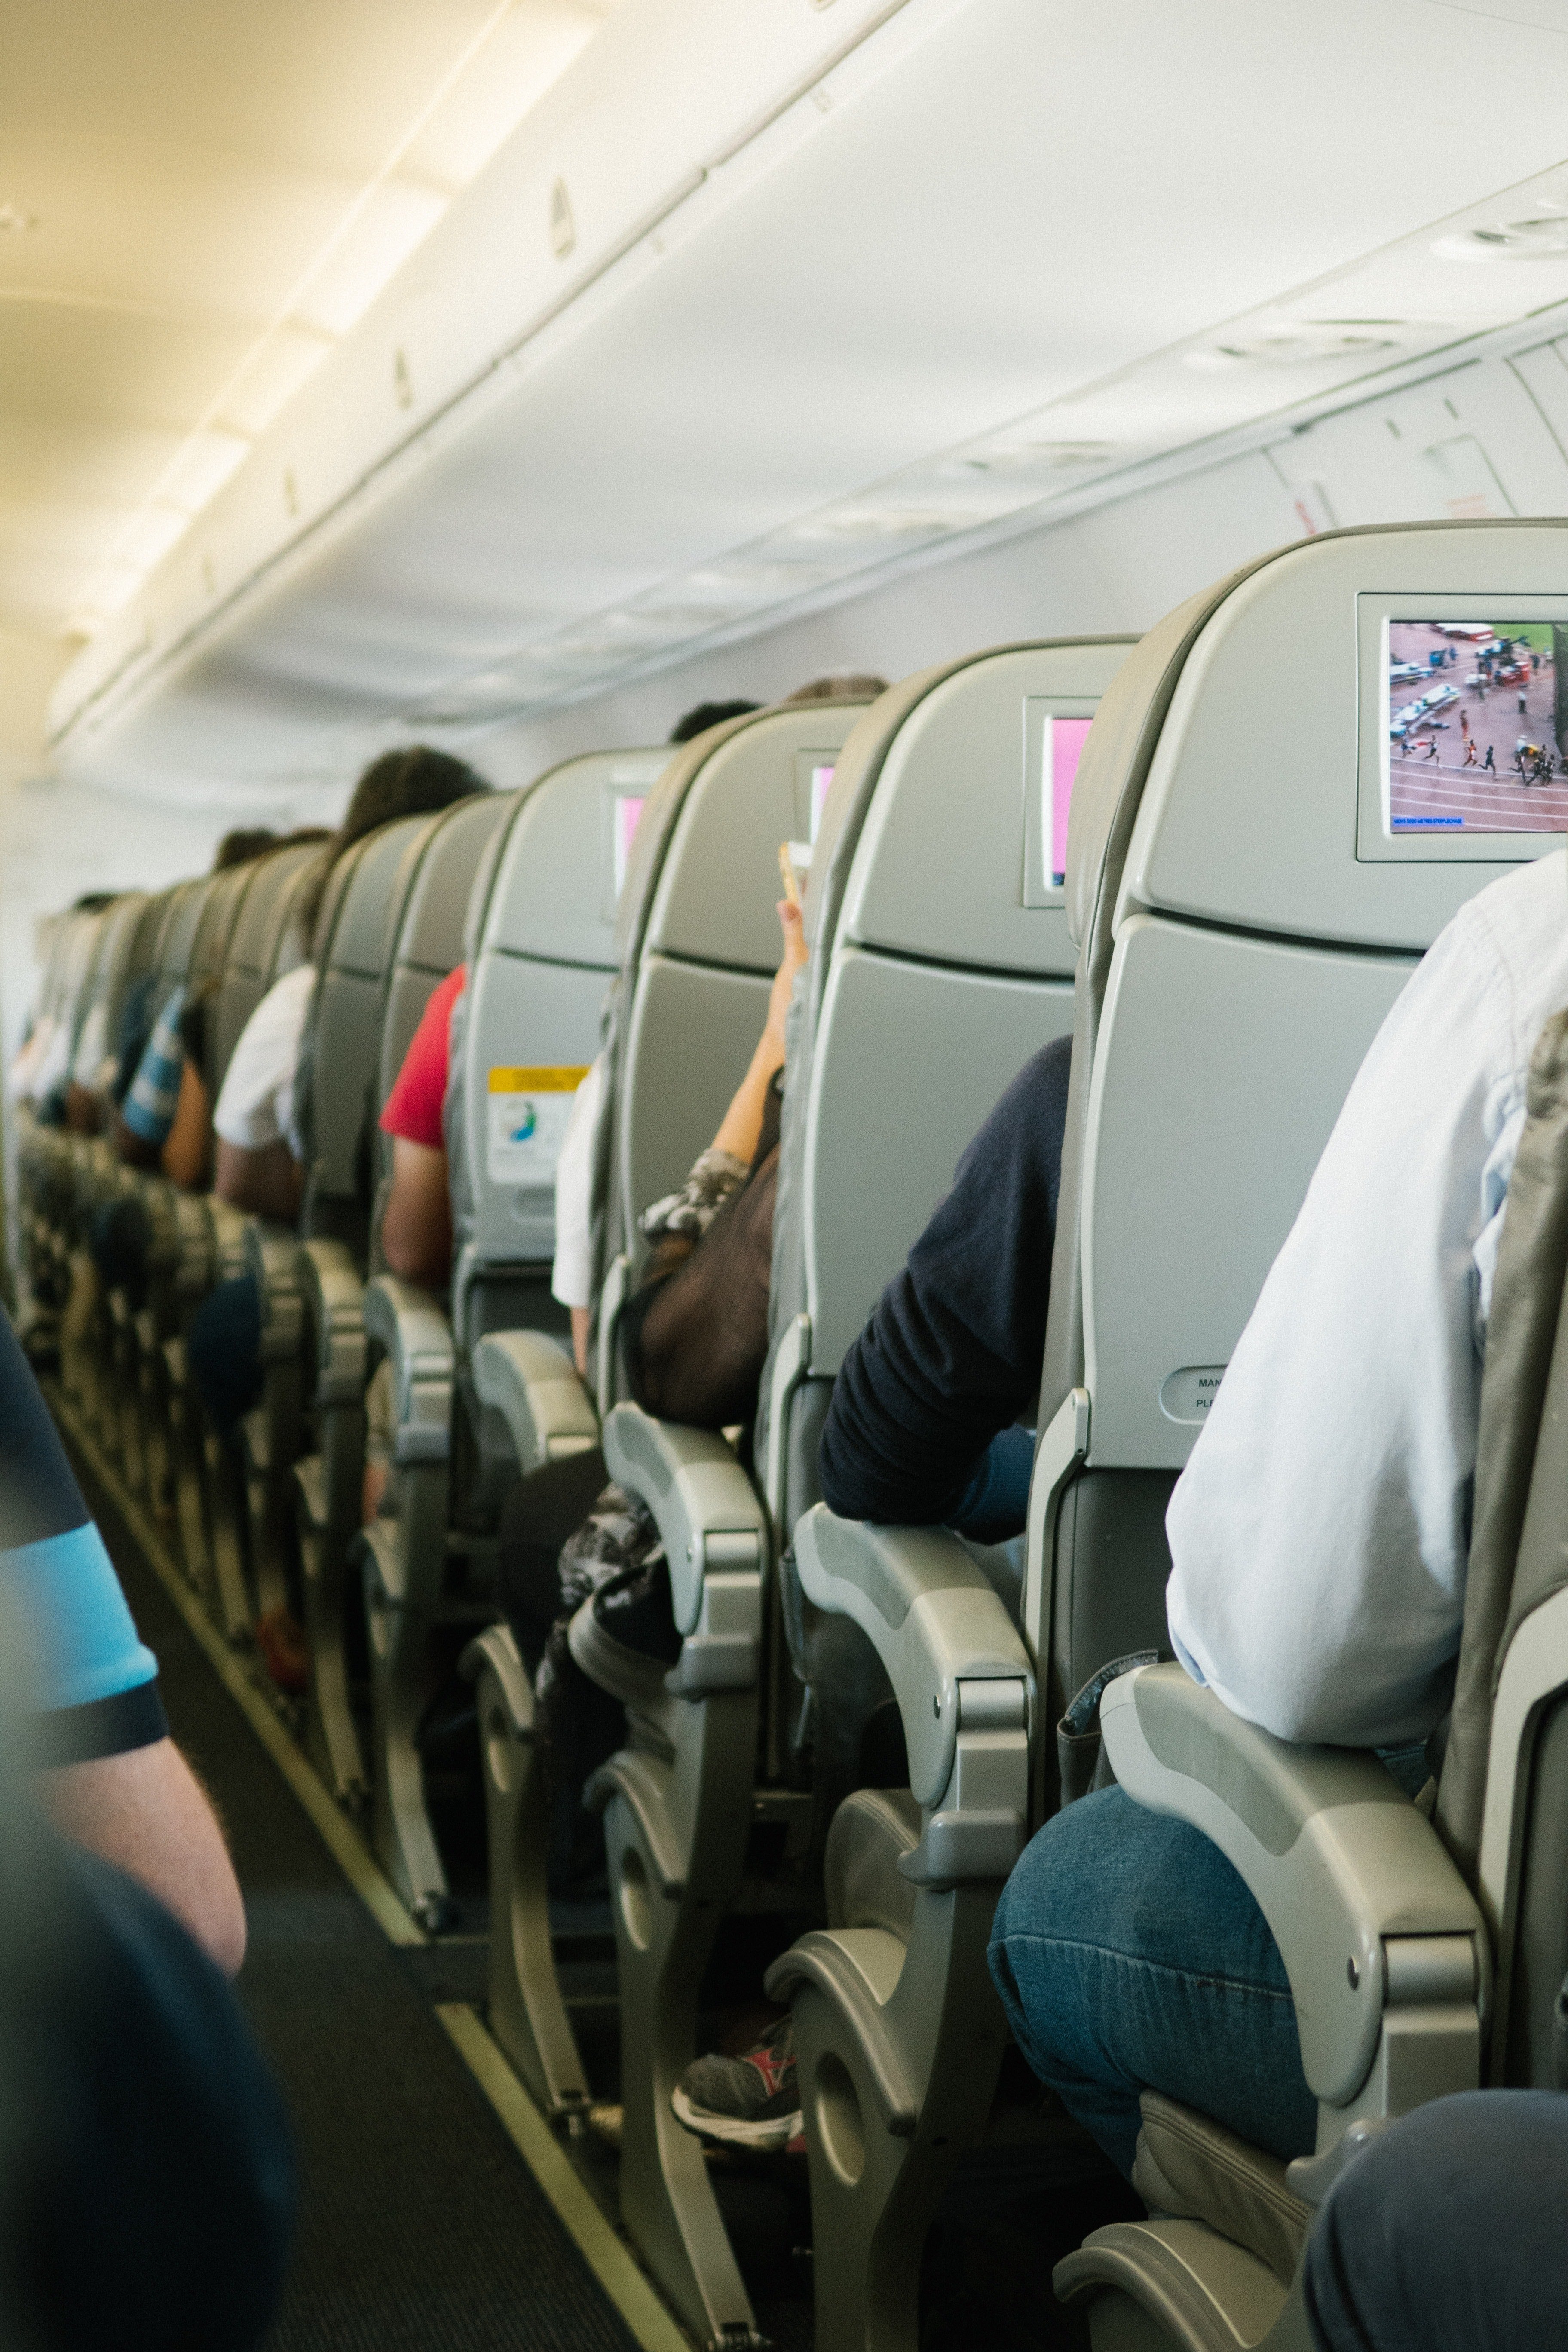 Luke walked around the plane for a couple of minutes, until he became afraid of the sea of unfamiliar faces and started crying | Source: Pexels